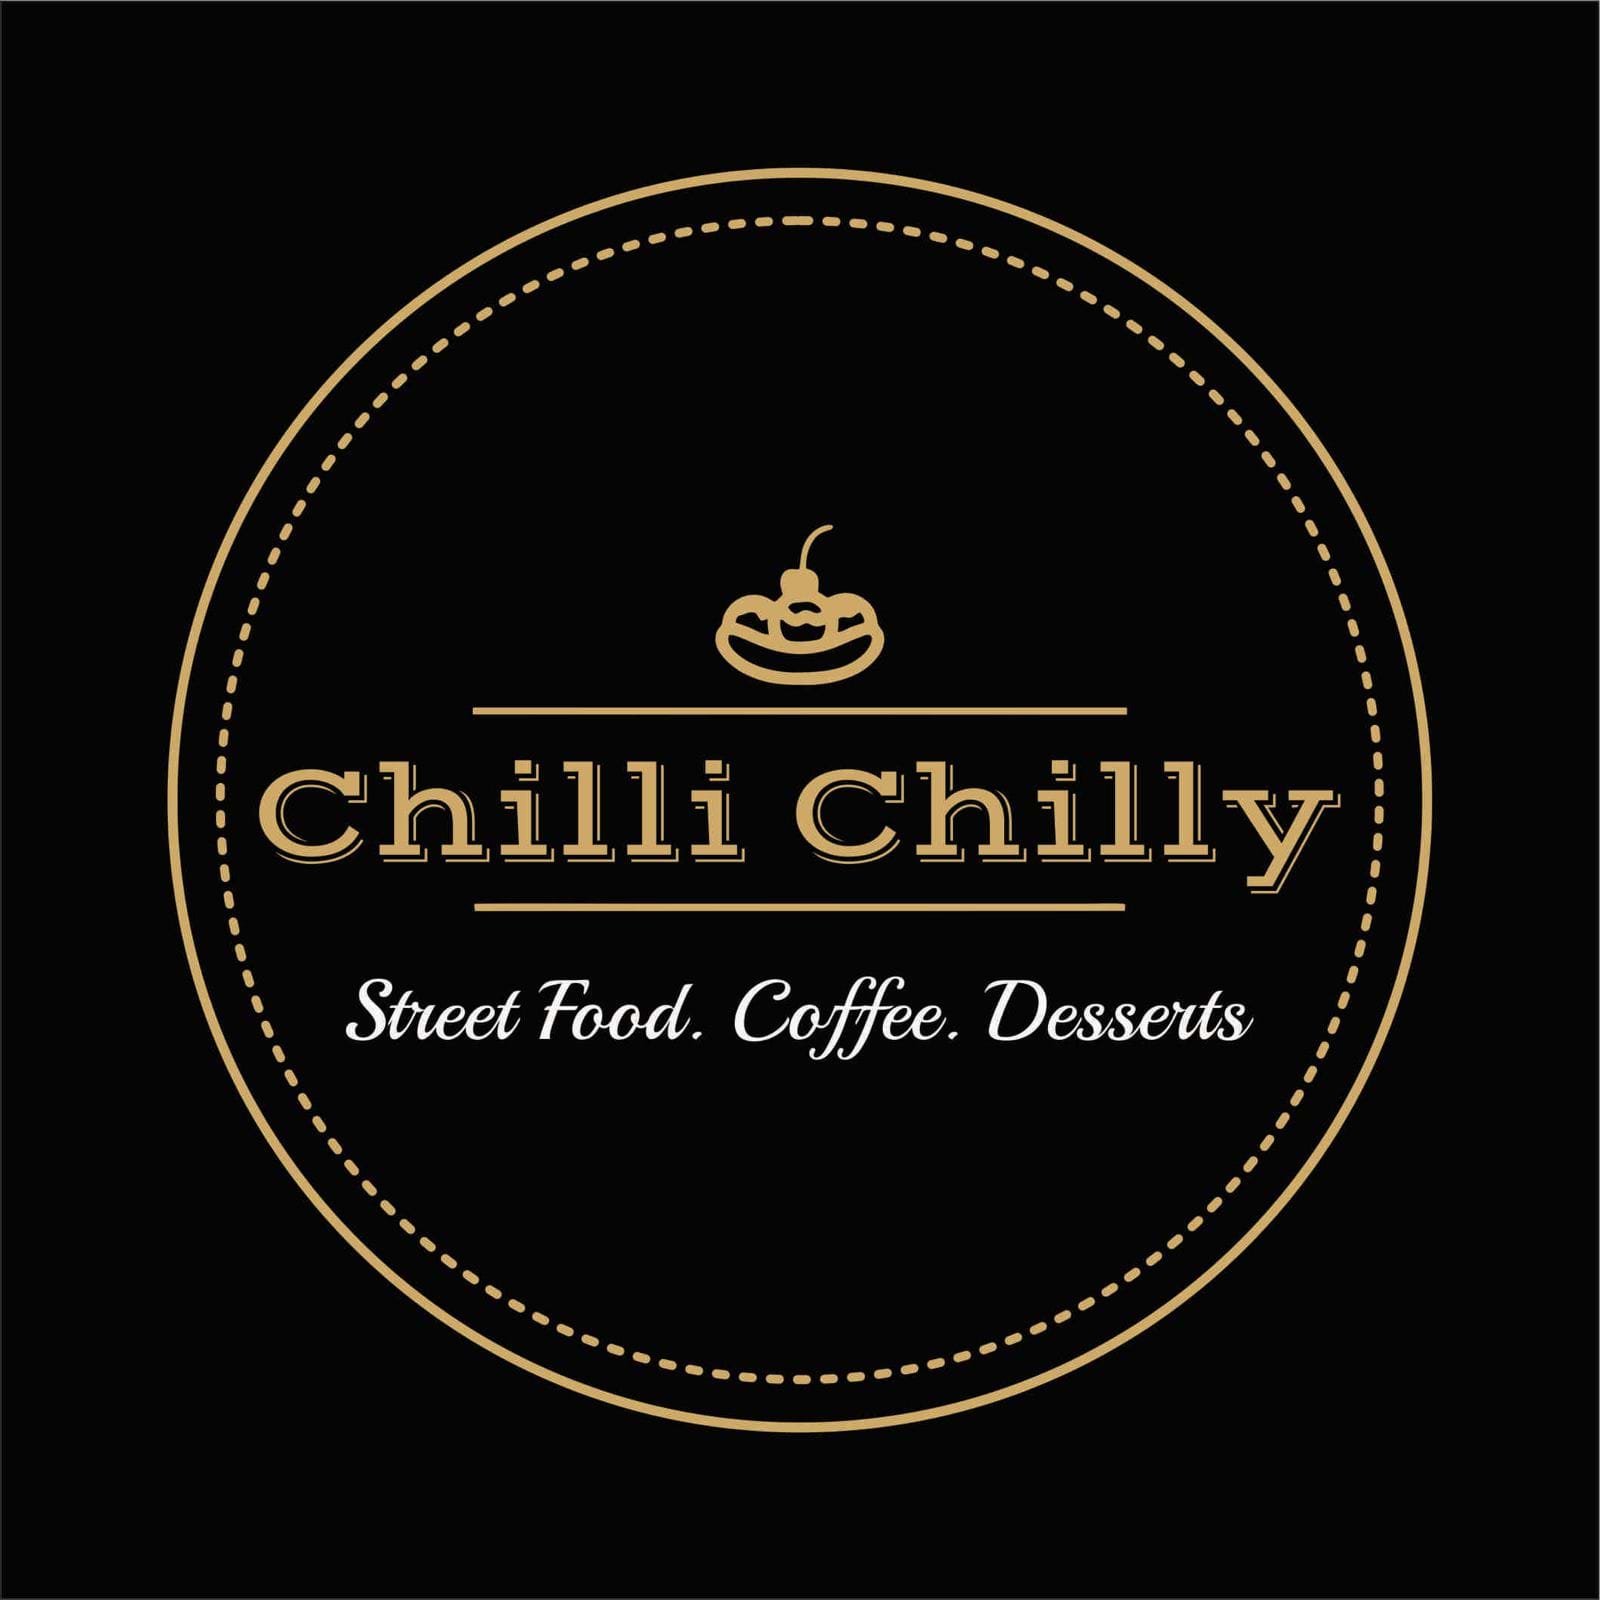 Chilli Chilly Street Food